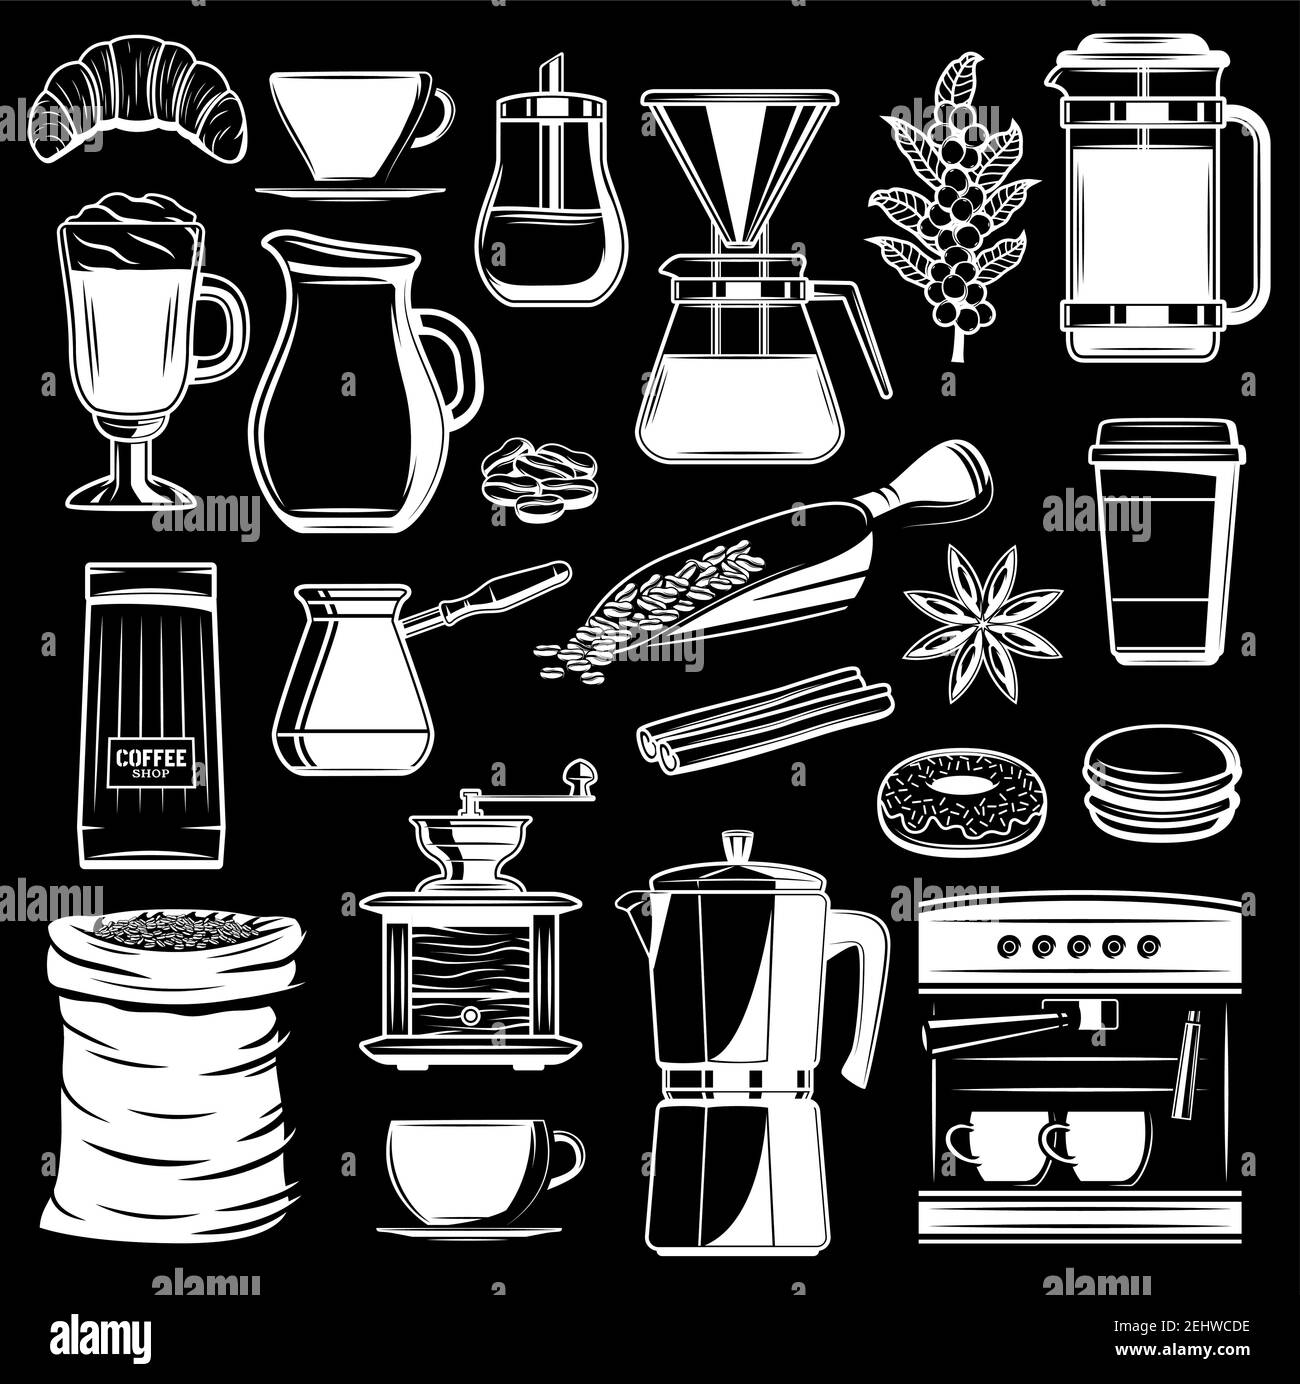 Vector coffee grinder and Turkish cezve maker, cinnamon and anise flavoring, milk pitcher and coffee beans with donut and cookie desserts for coffeesh Stock Vector